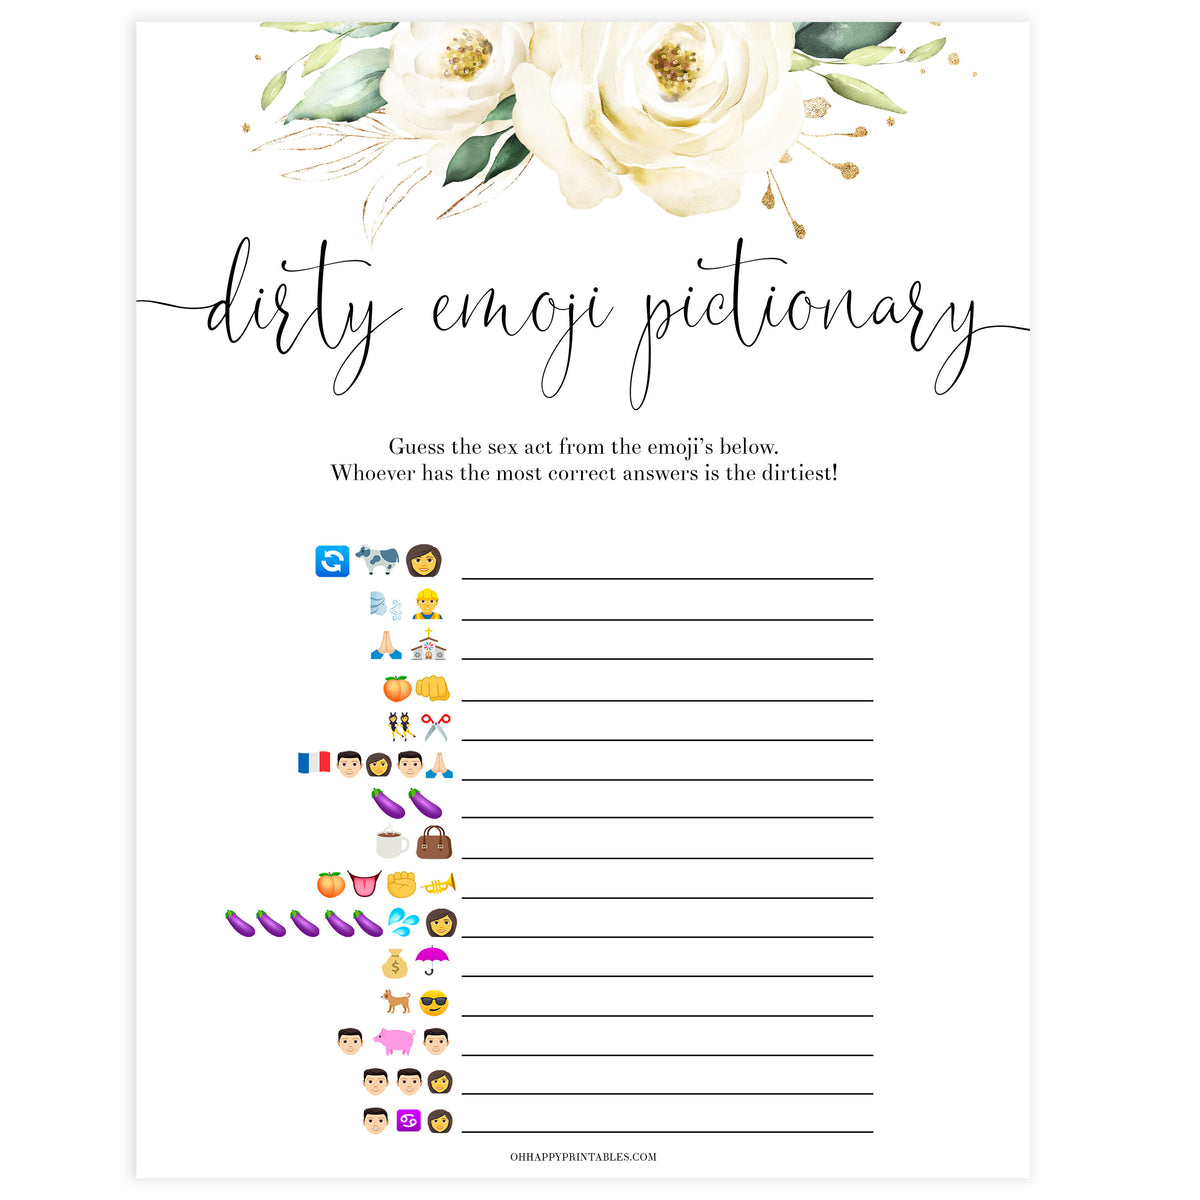 dirty emoji pictionary game, Printable bachelorette games, floral bachelorette, floral hen party games, fun hen party games, bachelorette game ideas, floral adult party games, naughty hen games, naughty bachelorette games